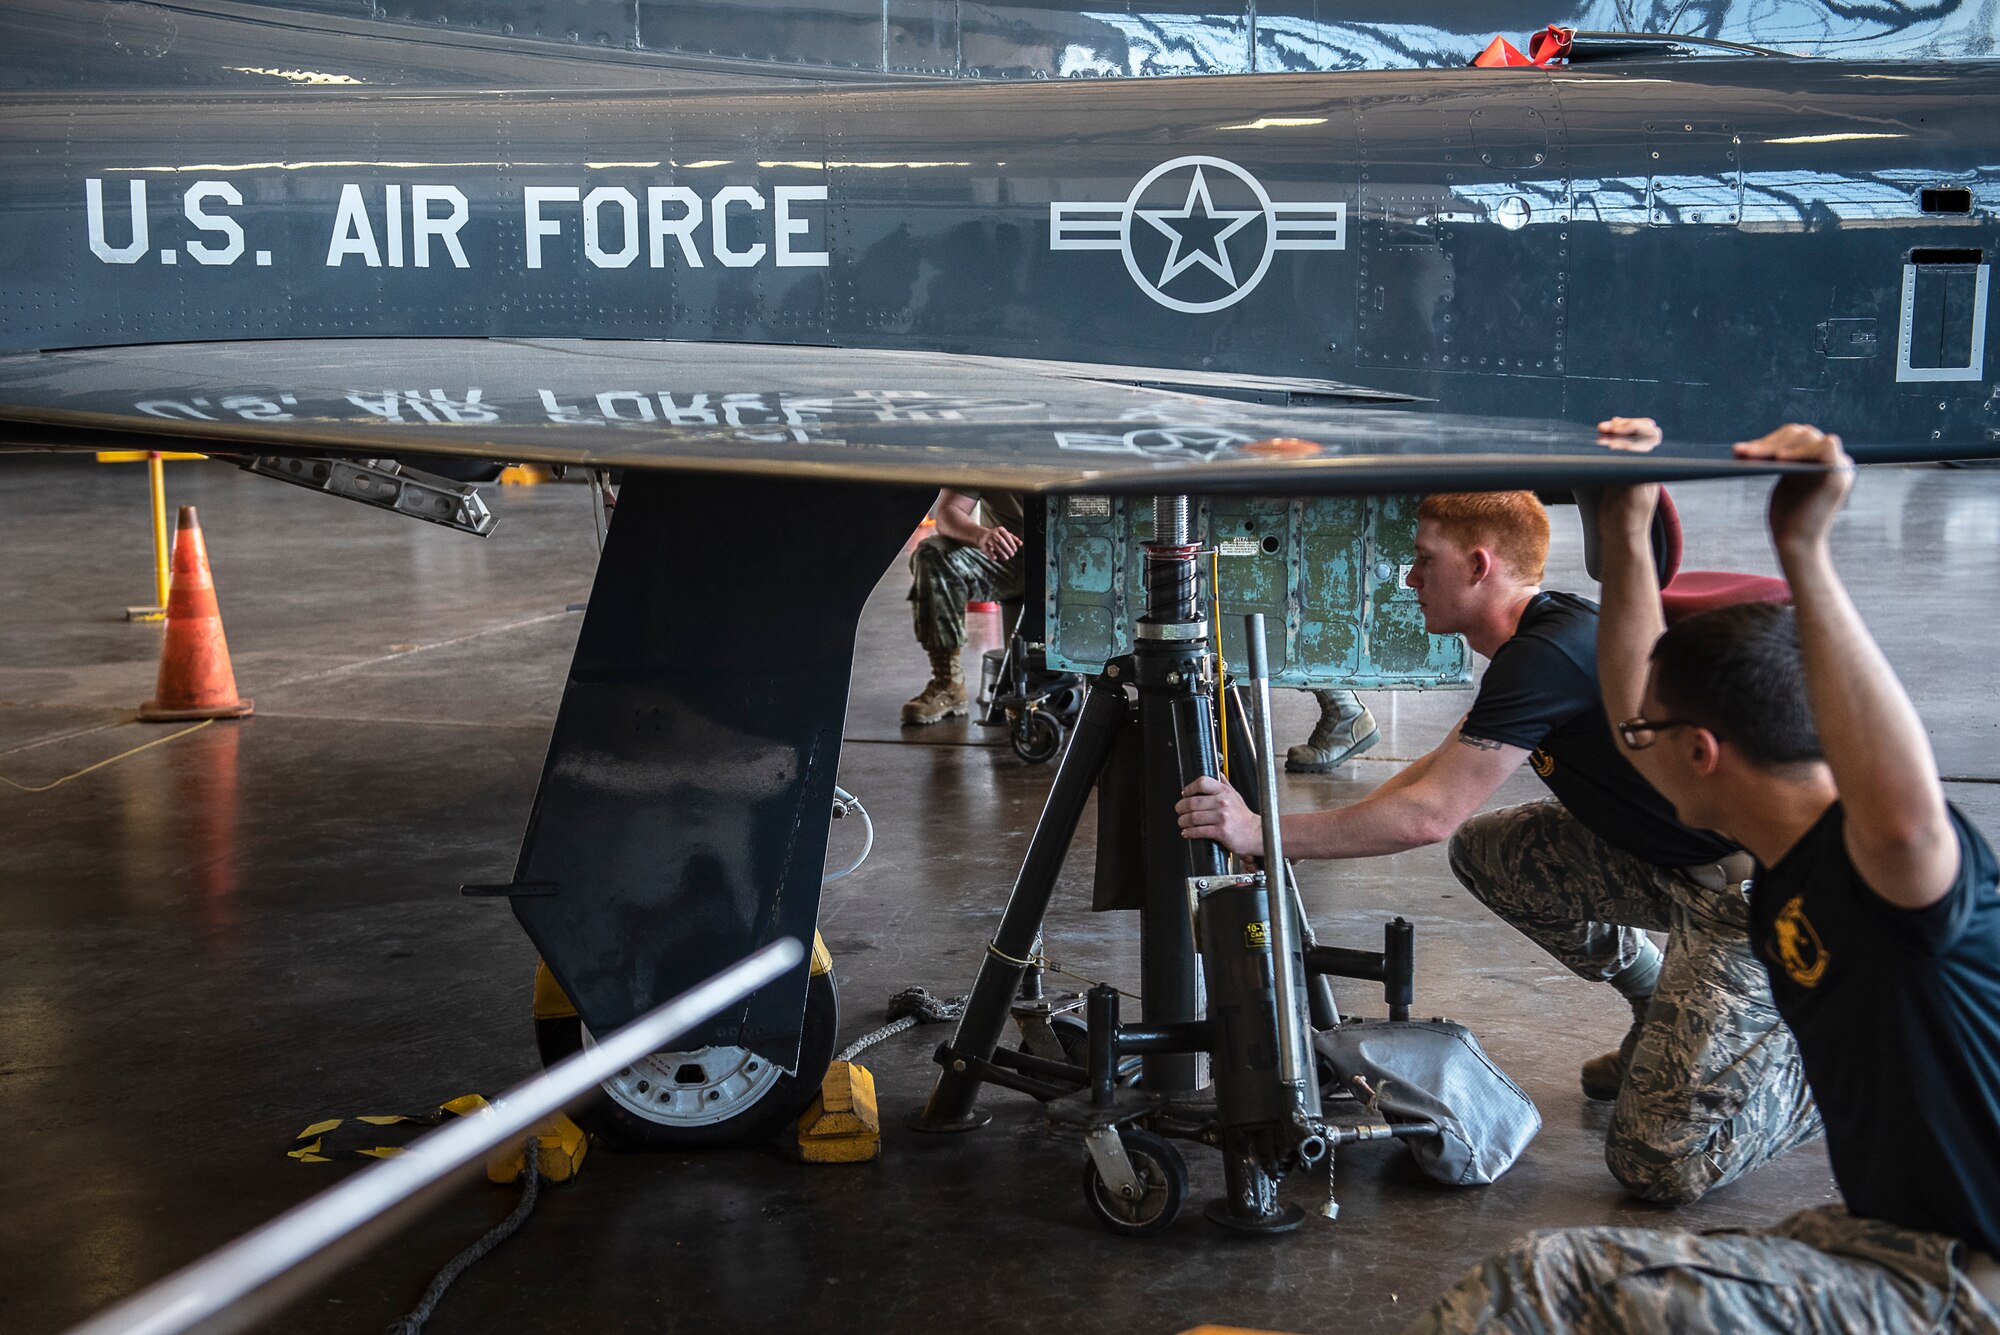 364th Training Squadron hydraulic systems apprentice course students positions an aircraft tripod jacks under a T-38 Talon at Sheppard Air Force Base, Texas, June 28, 2019. Each tripod jack requires at least two people and is manually operated. The students are lifting the jet to perform a gear swing operational check. (U.S. Air Force photo by Airman 1st Class Pedro Tenorio)